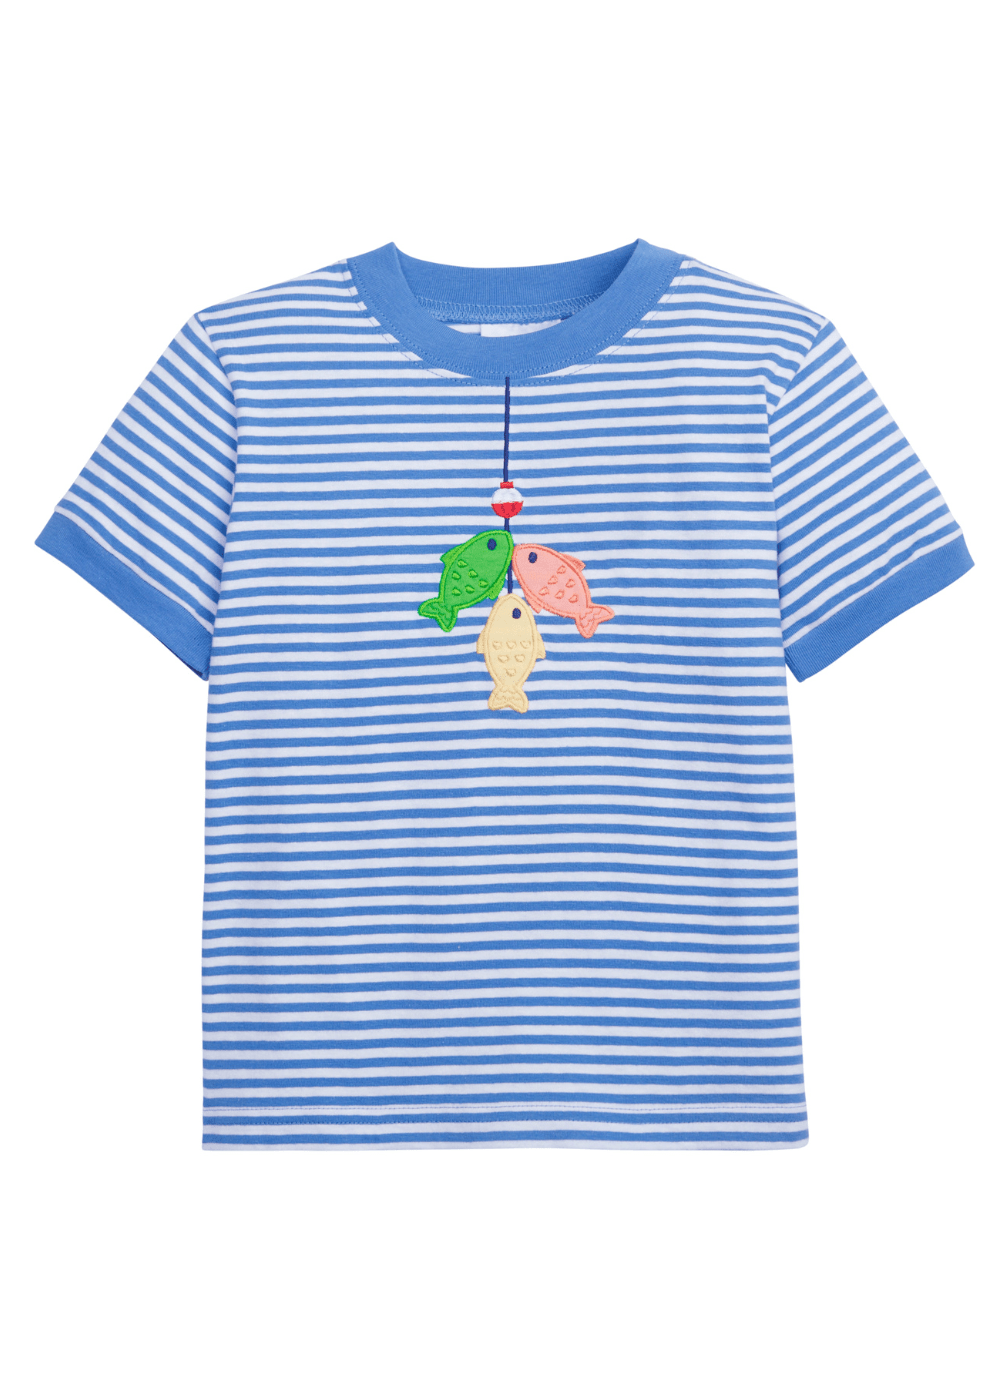 classic childrens clothing boys blue and white t-shirt with applique fish